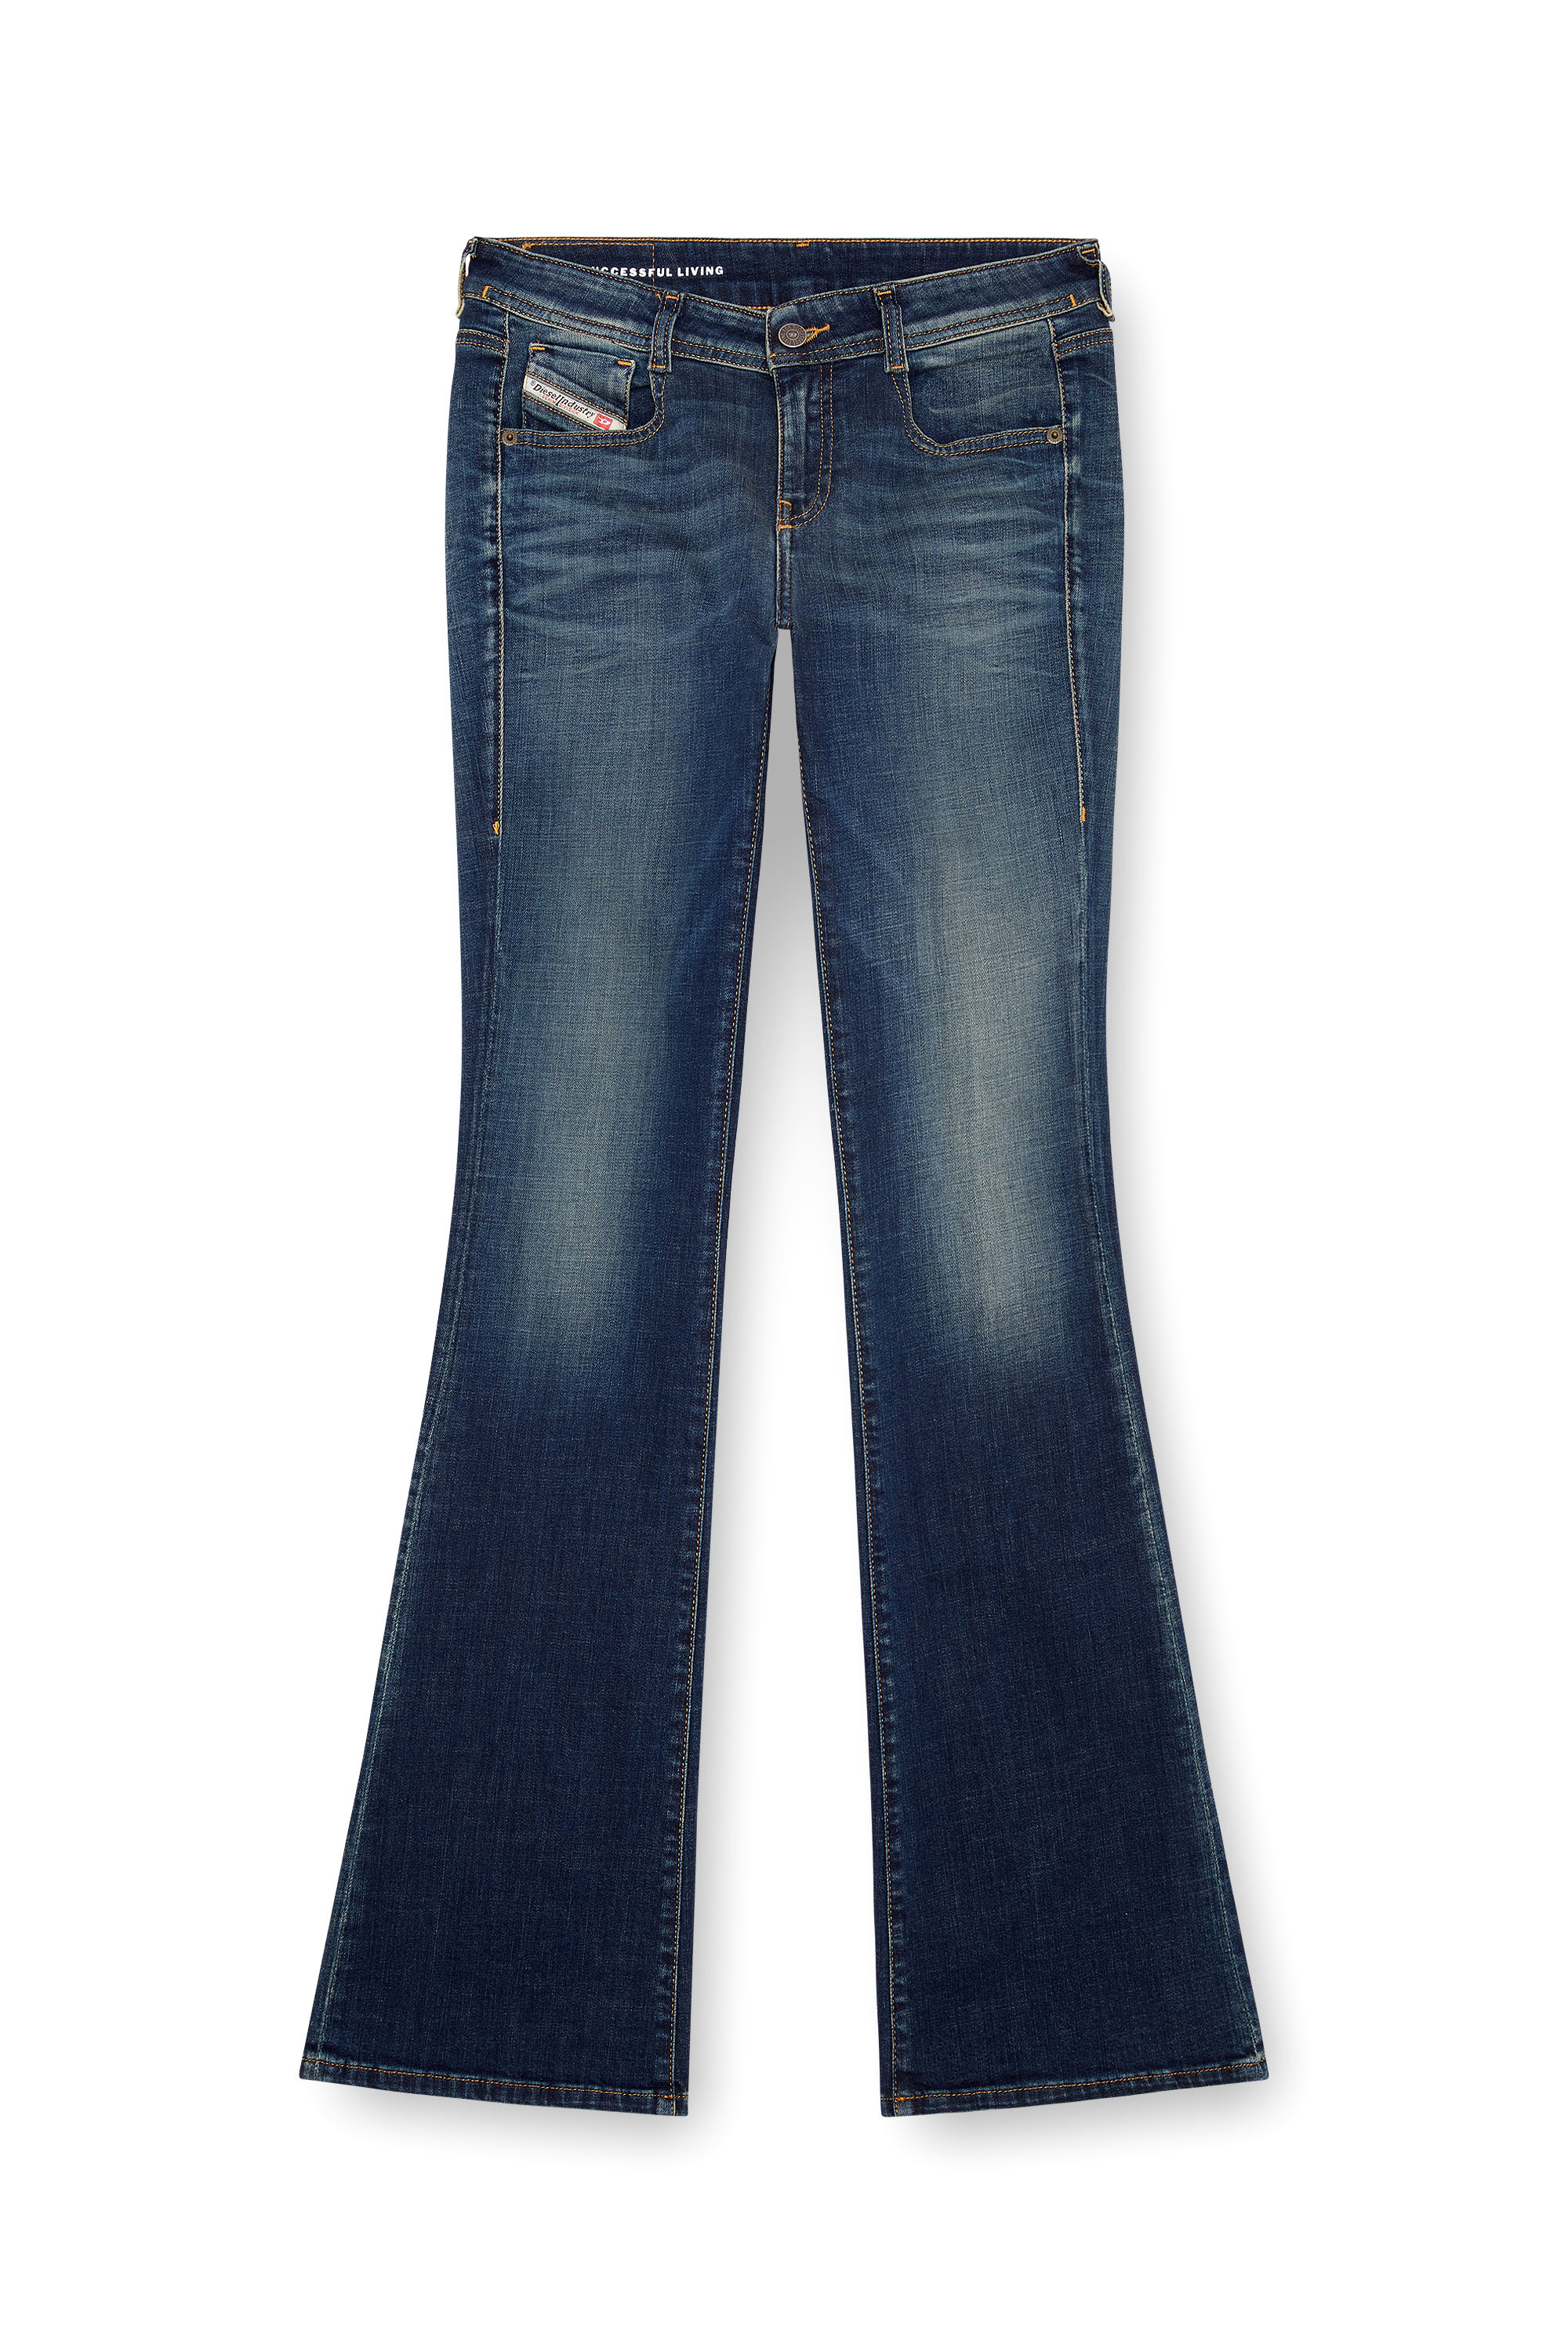 Diesel - Bootcut and Flare Jeans 1969 D-Ebbey 09J20, Mujer Bootcut y Flare Jeans - 1969 D-Ebbey in Azul marino - Image 5